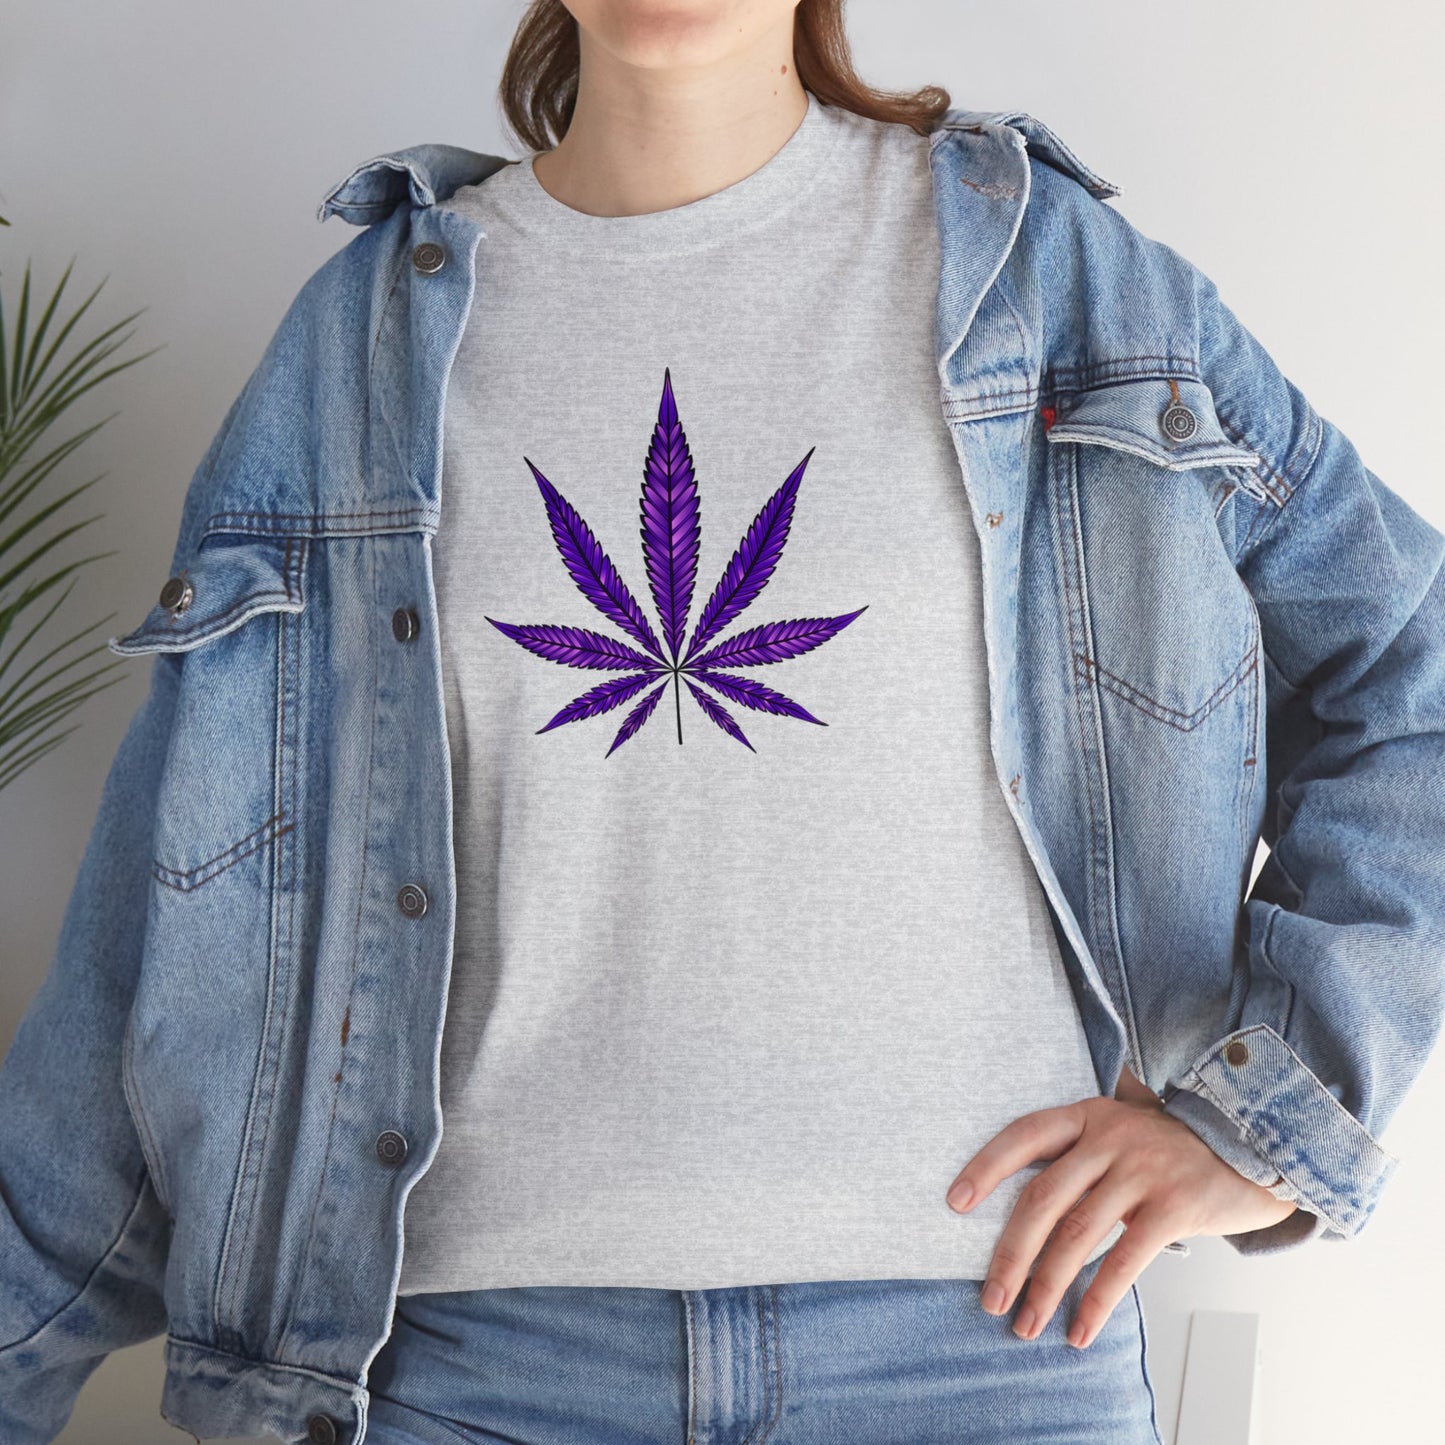 A person wearing a denim jacket over a vibrant color "Purple Cannabis Leaf Tee", embracing the marijuana culture.